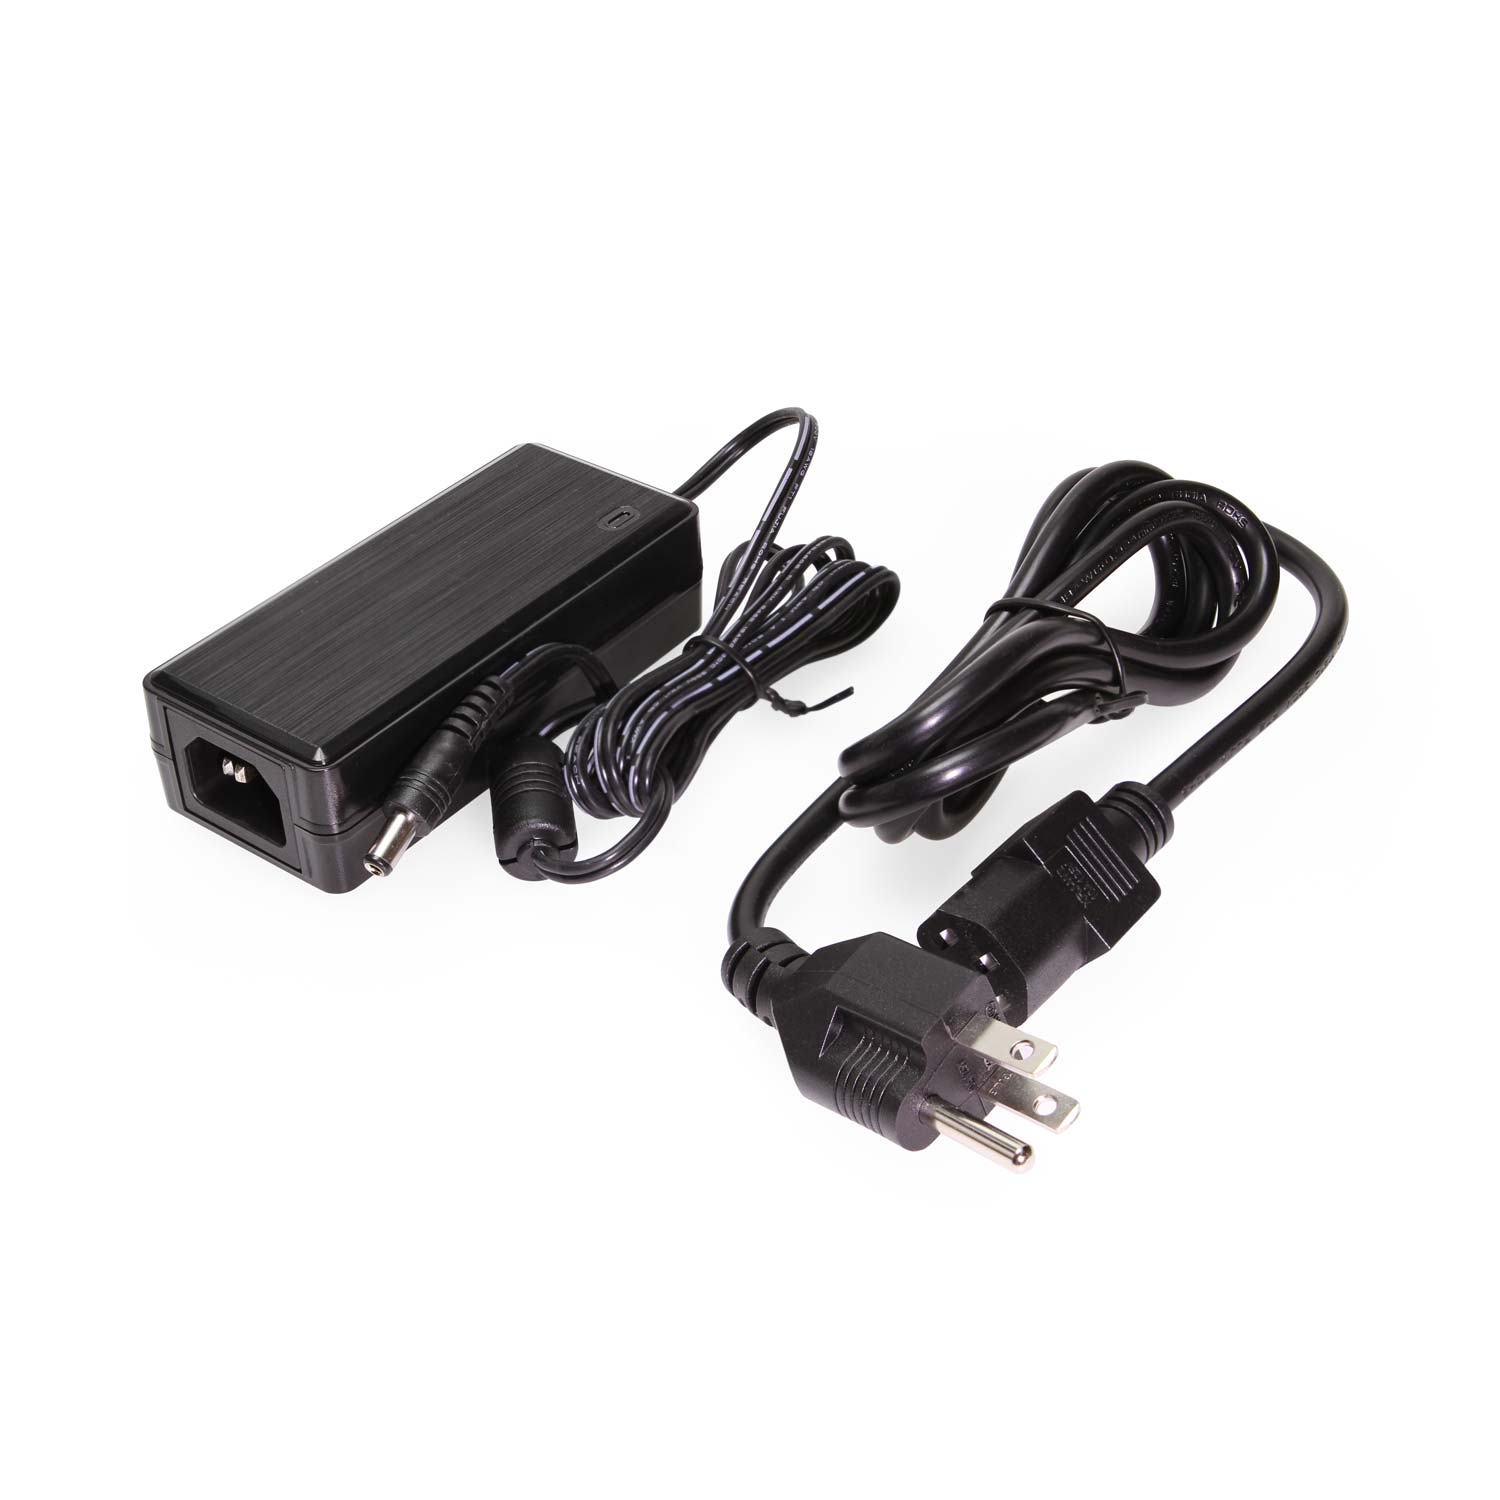 DC/DC Power Converter 12V DC Input to 5V DC Output at 1 Amp Wire to Dual USB